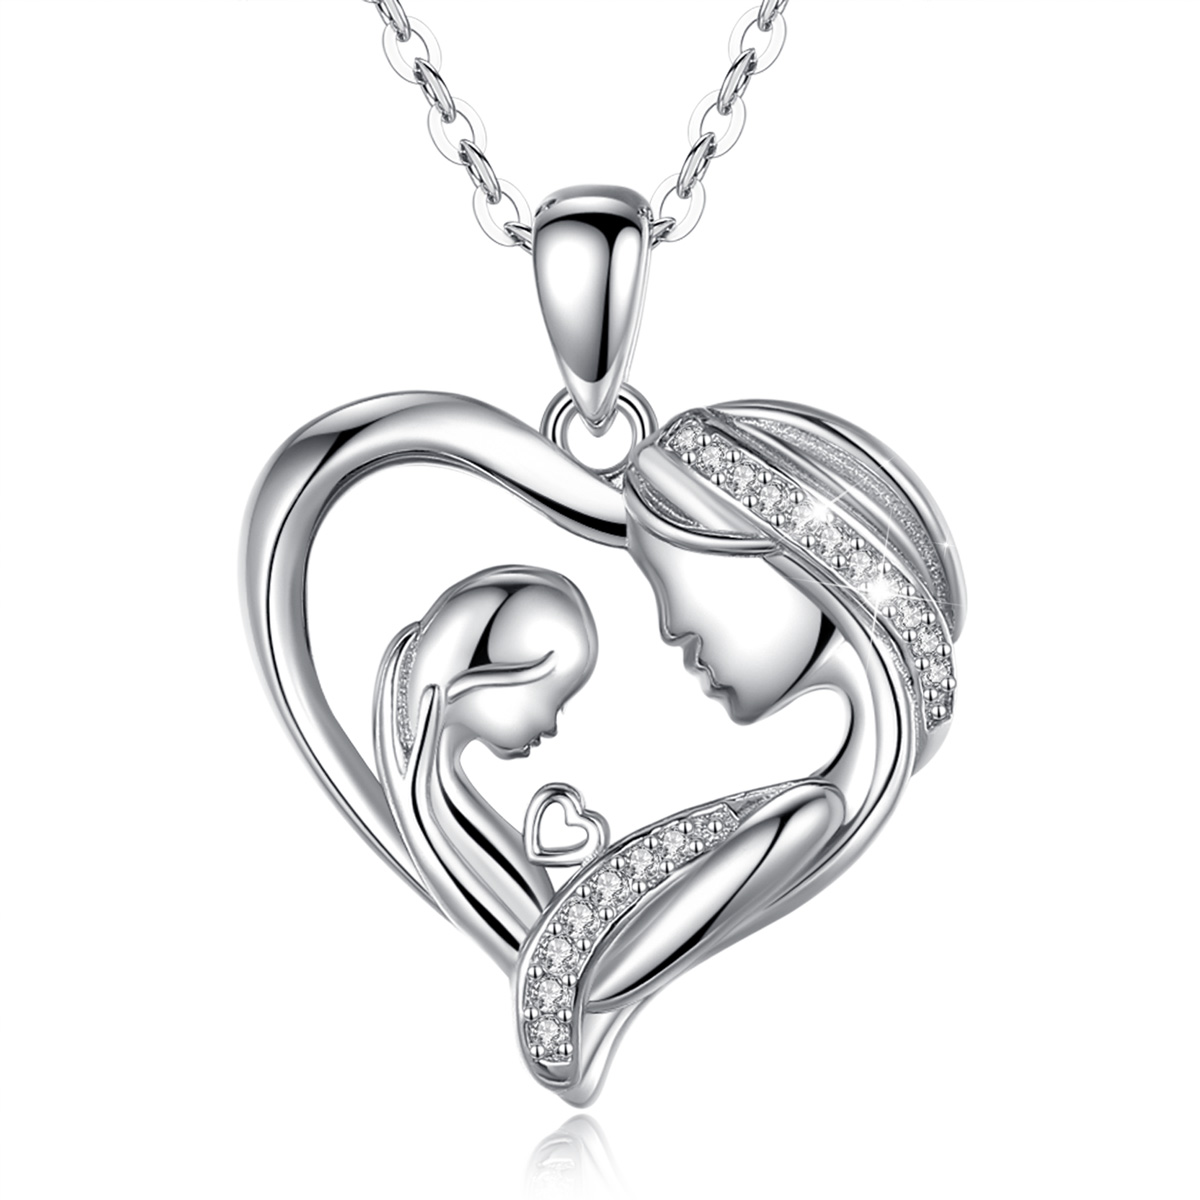 Merryshine Jewelry Rhodium Plated 925 Sterling Silver And White CZ Diamond Mother Daughter Jewellery Necklace